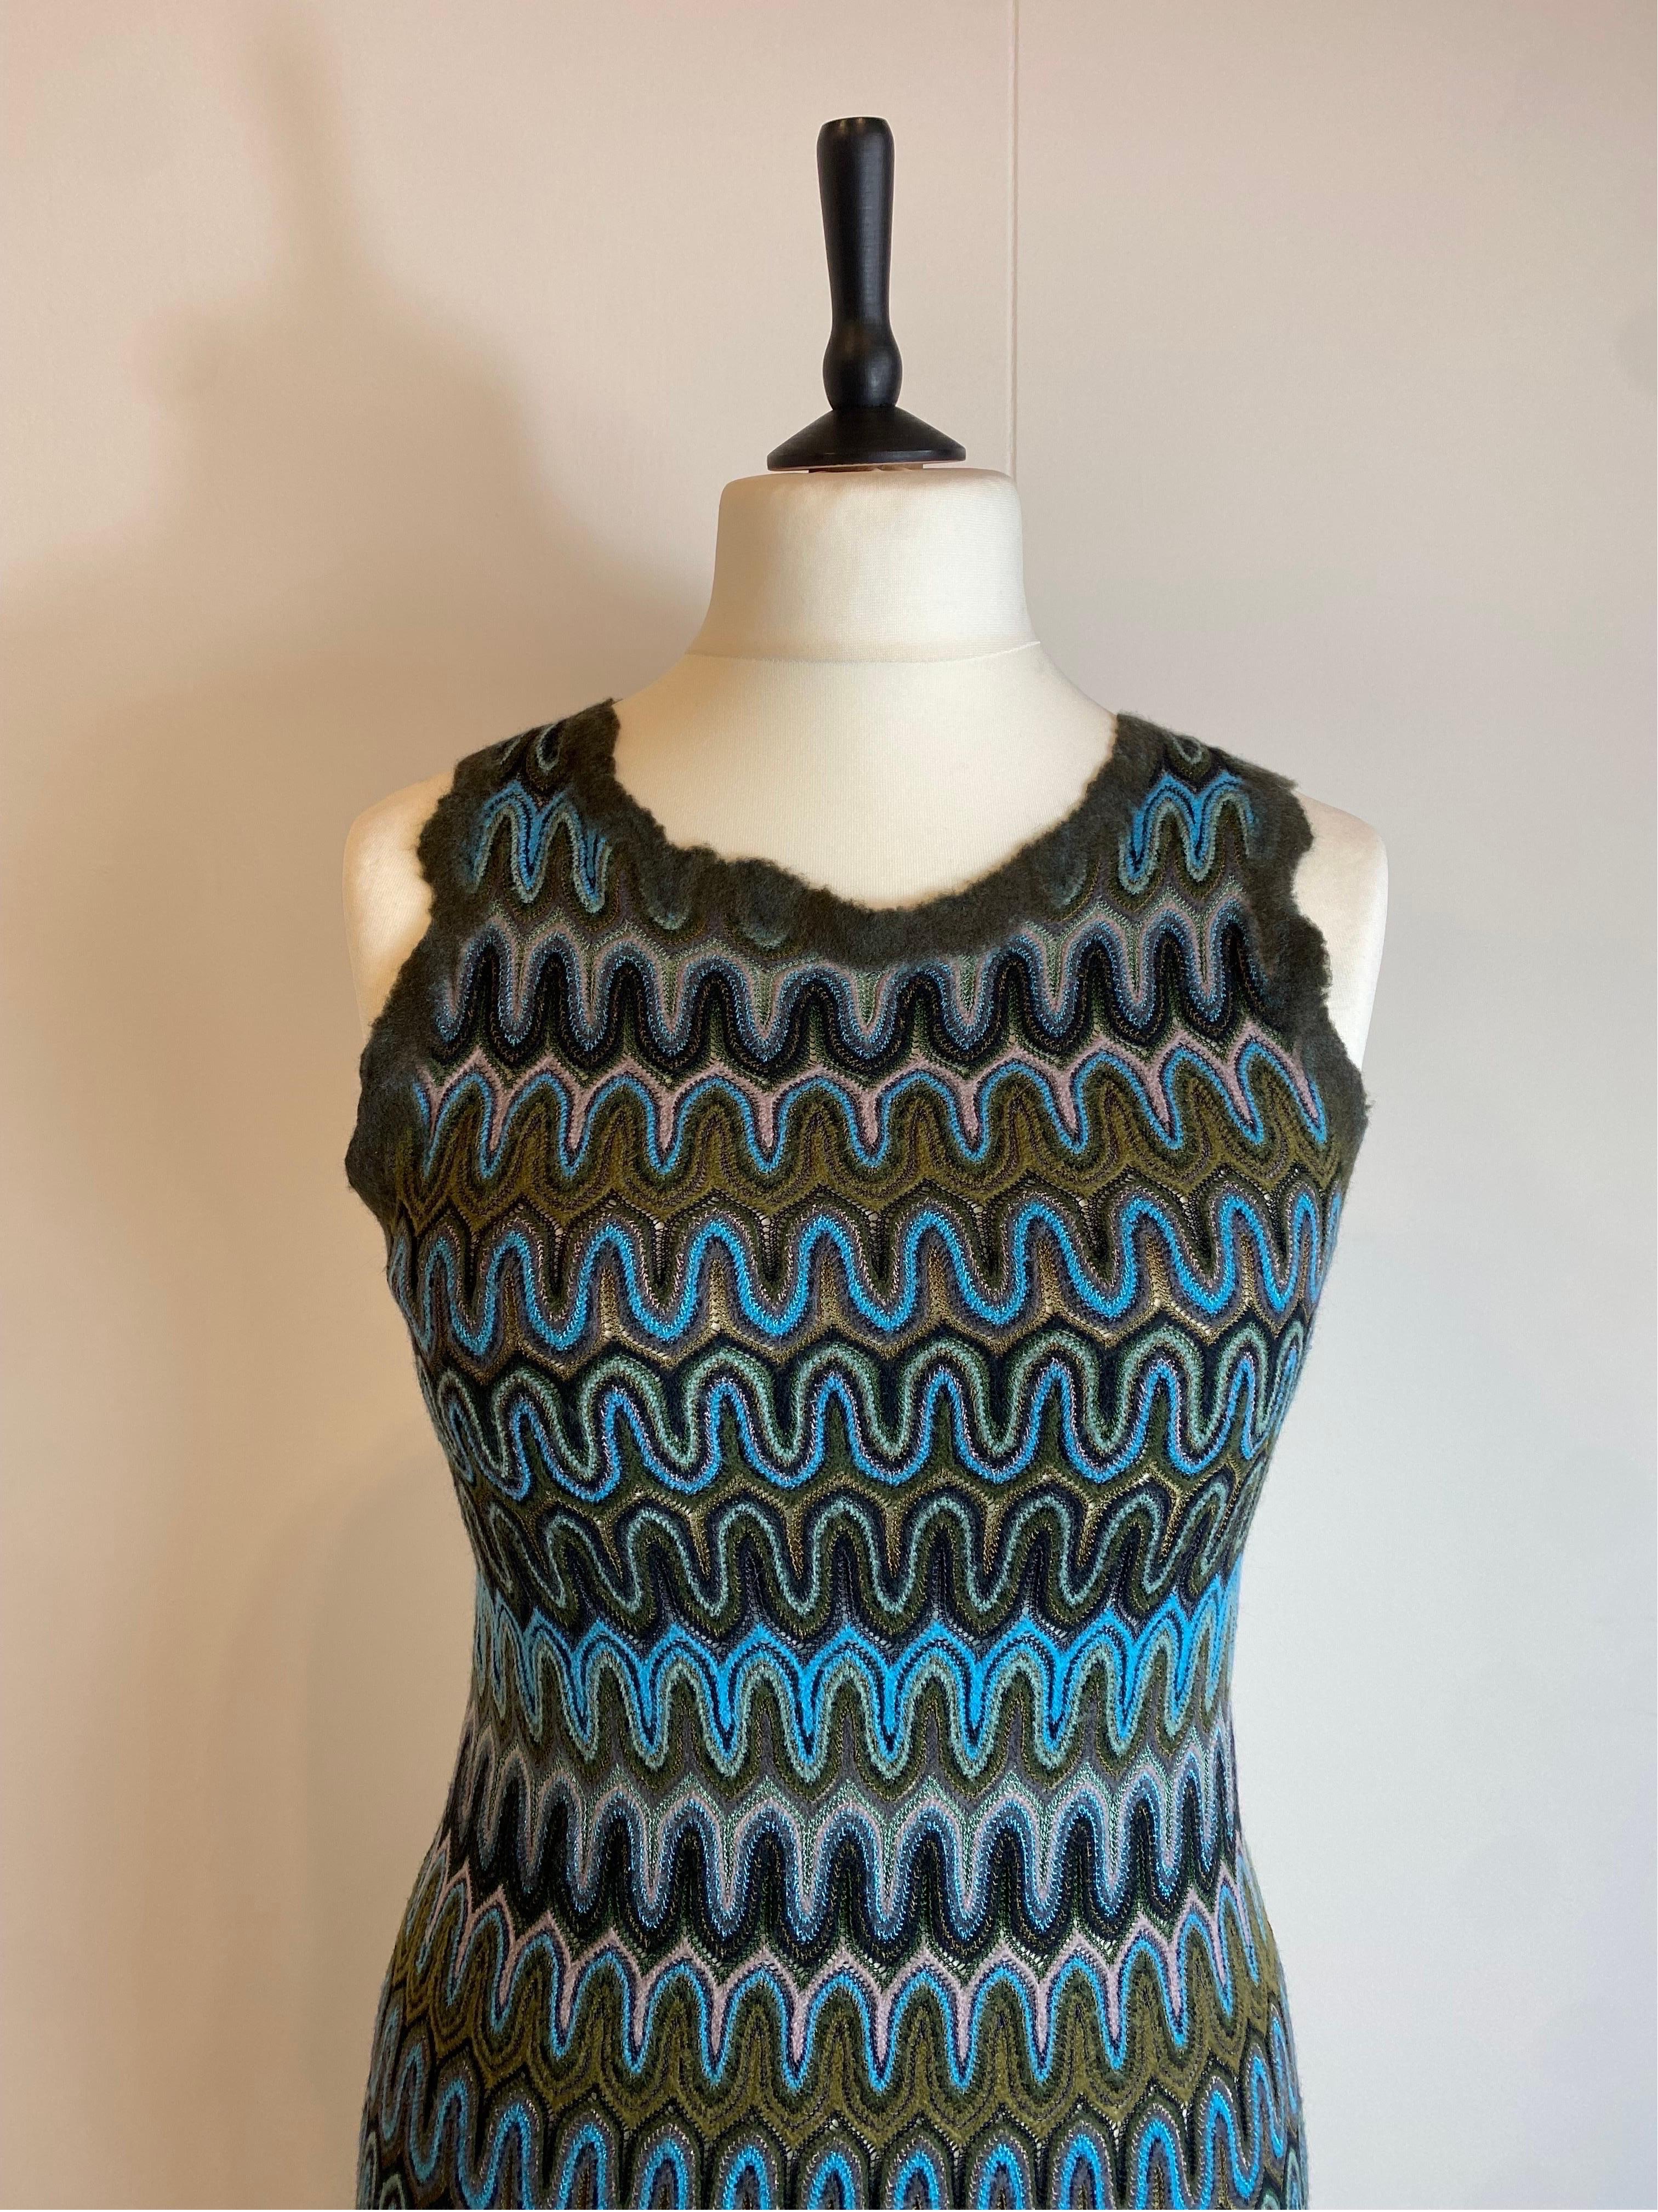 Missoni dress.
In viscose, wool and nylon.
Very particular workmanship of the last part of the skirt.
Italian size 42.
Bust 38 cm
Waist 36 cm
Length 144 cm
Second hand item but excellent general condition.
It shows minimal signs of normal use.